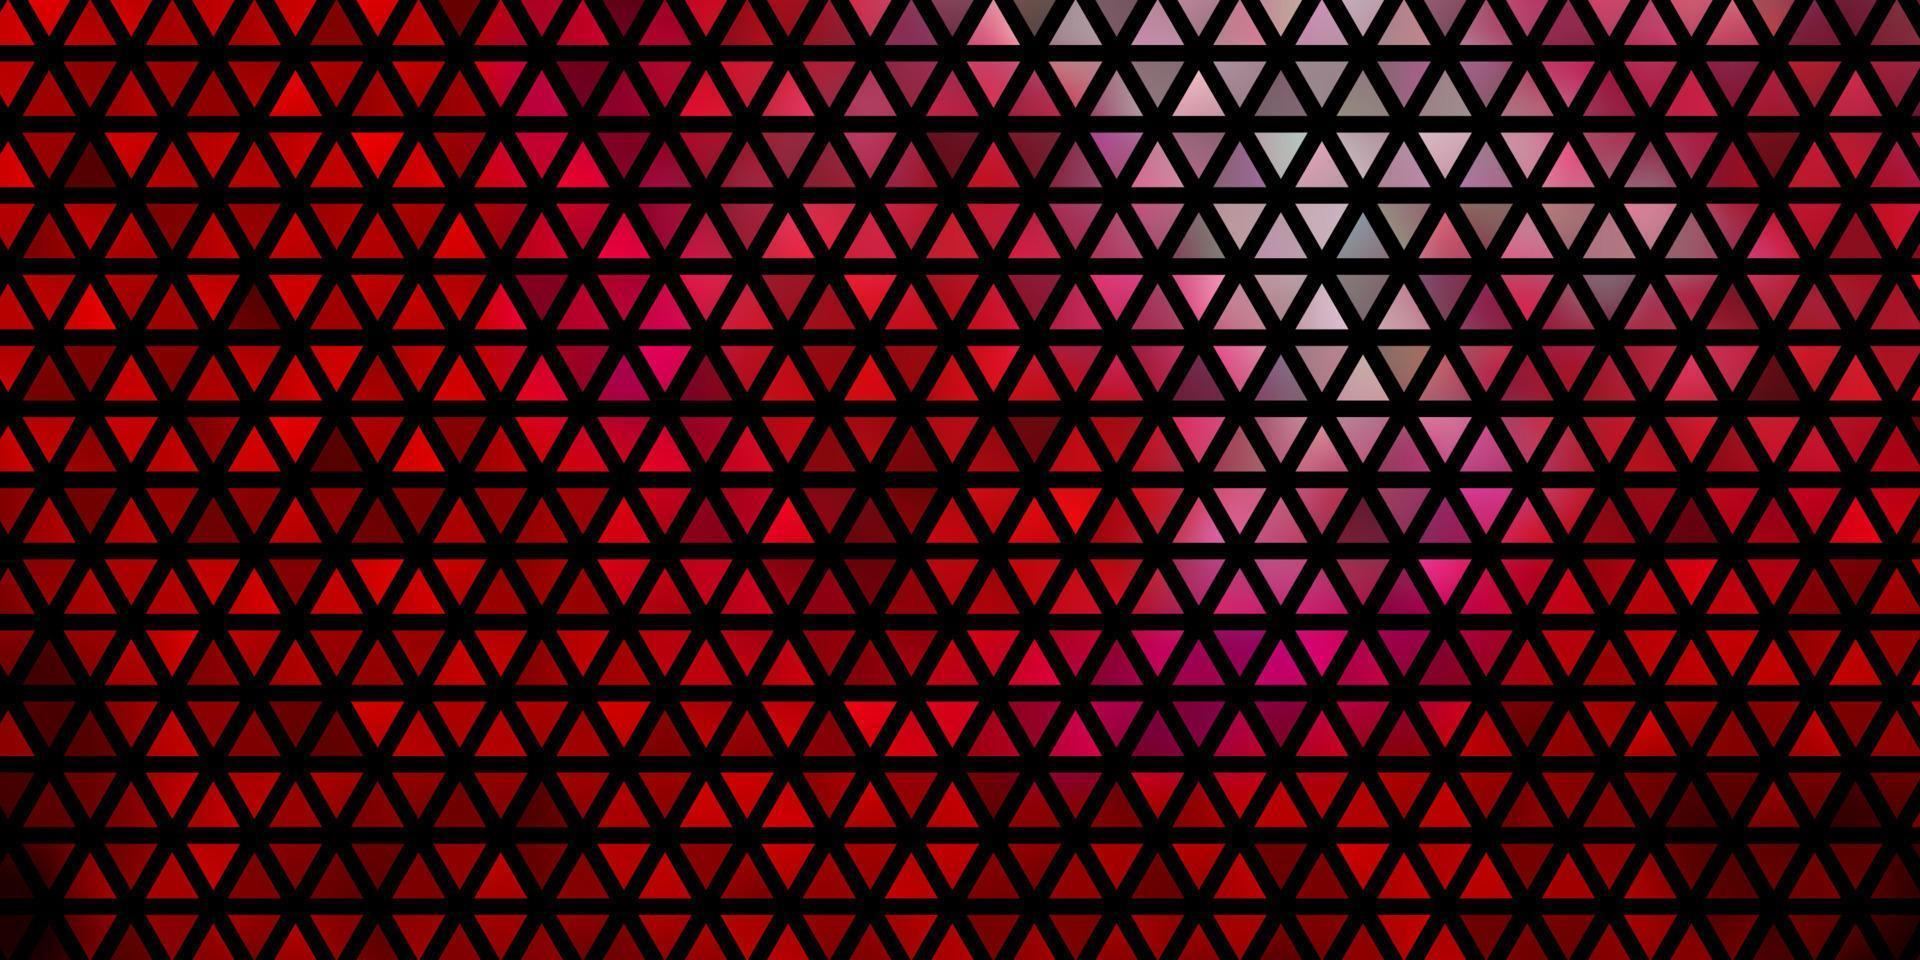 Light Pink, Red vector texture with triangular style.